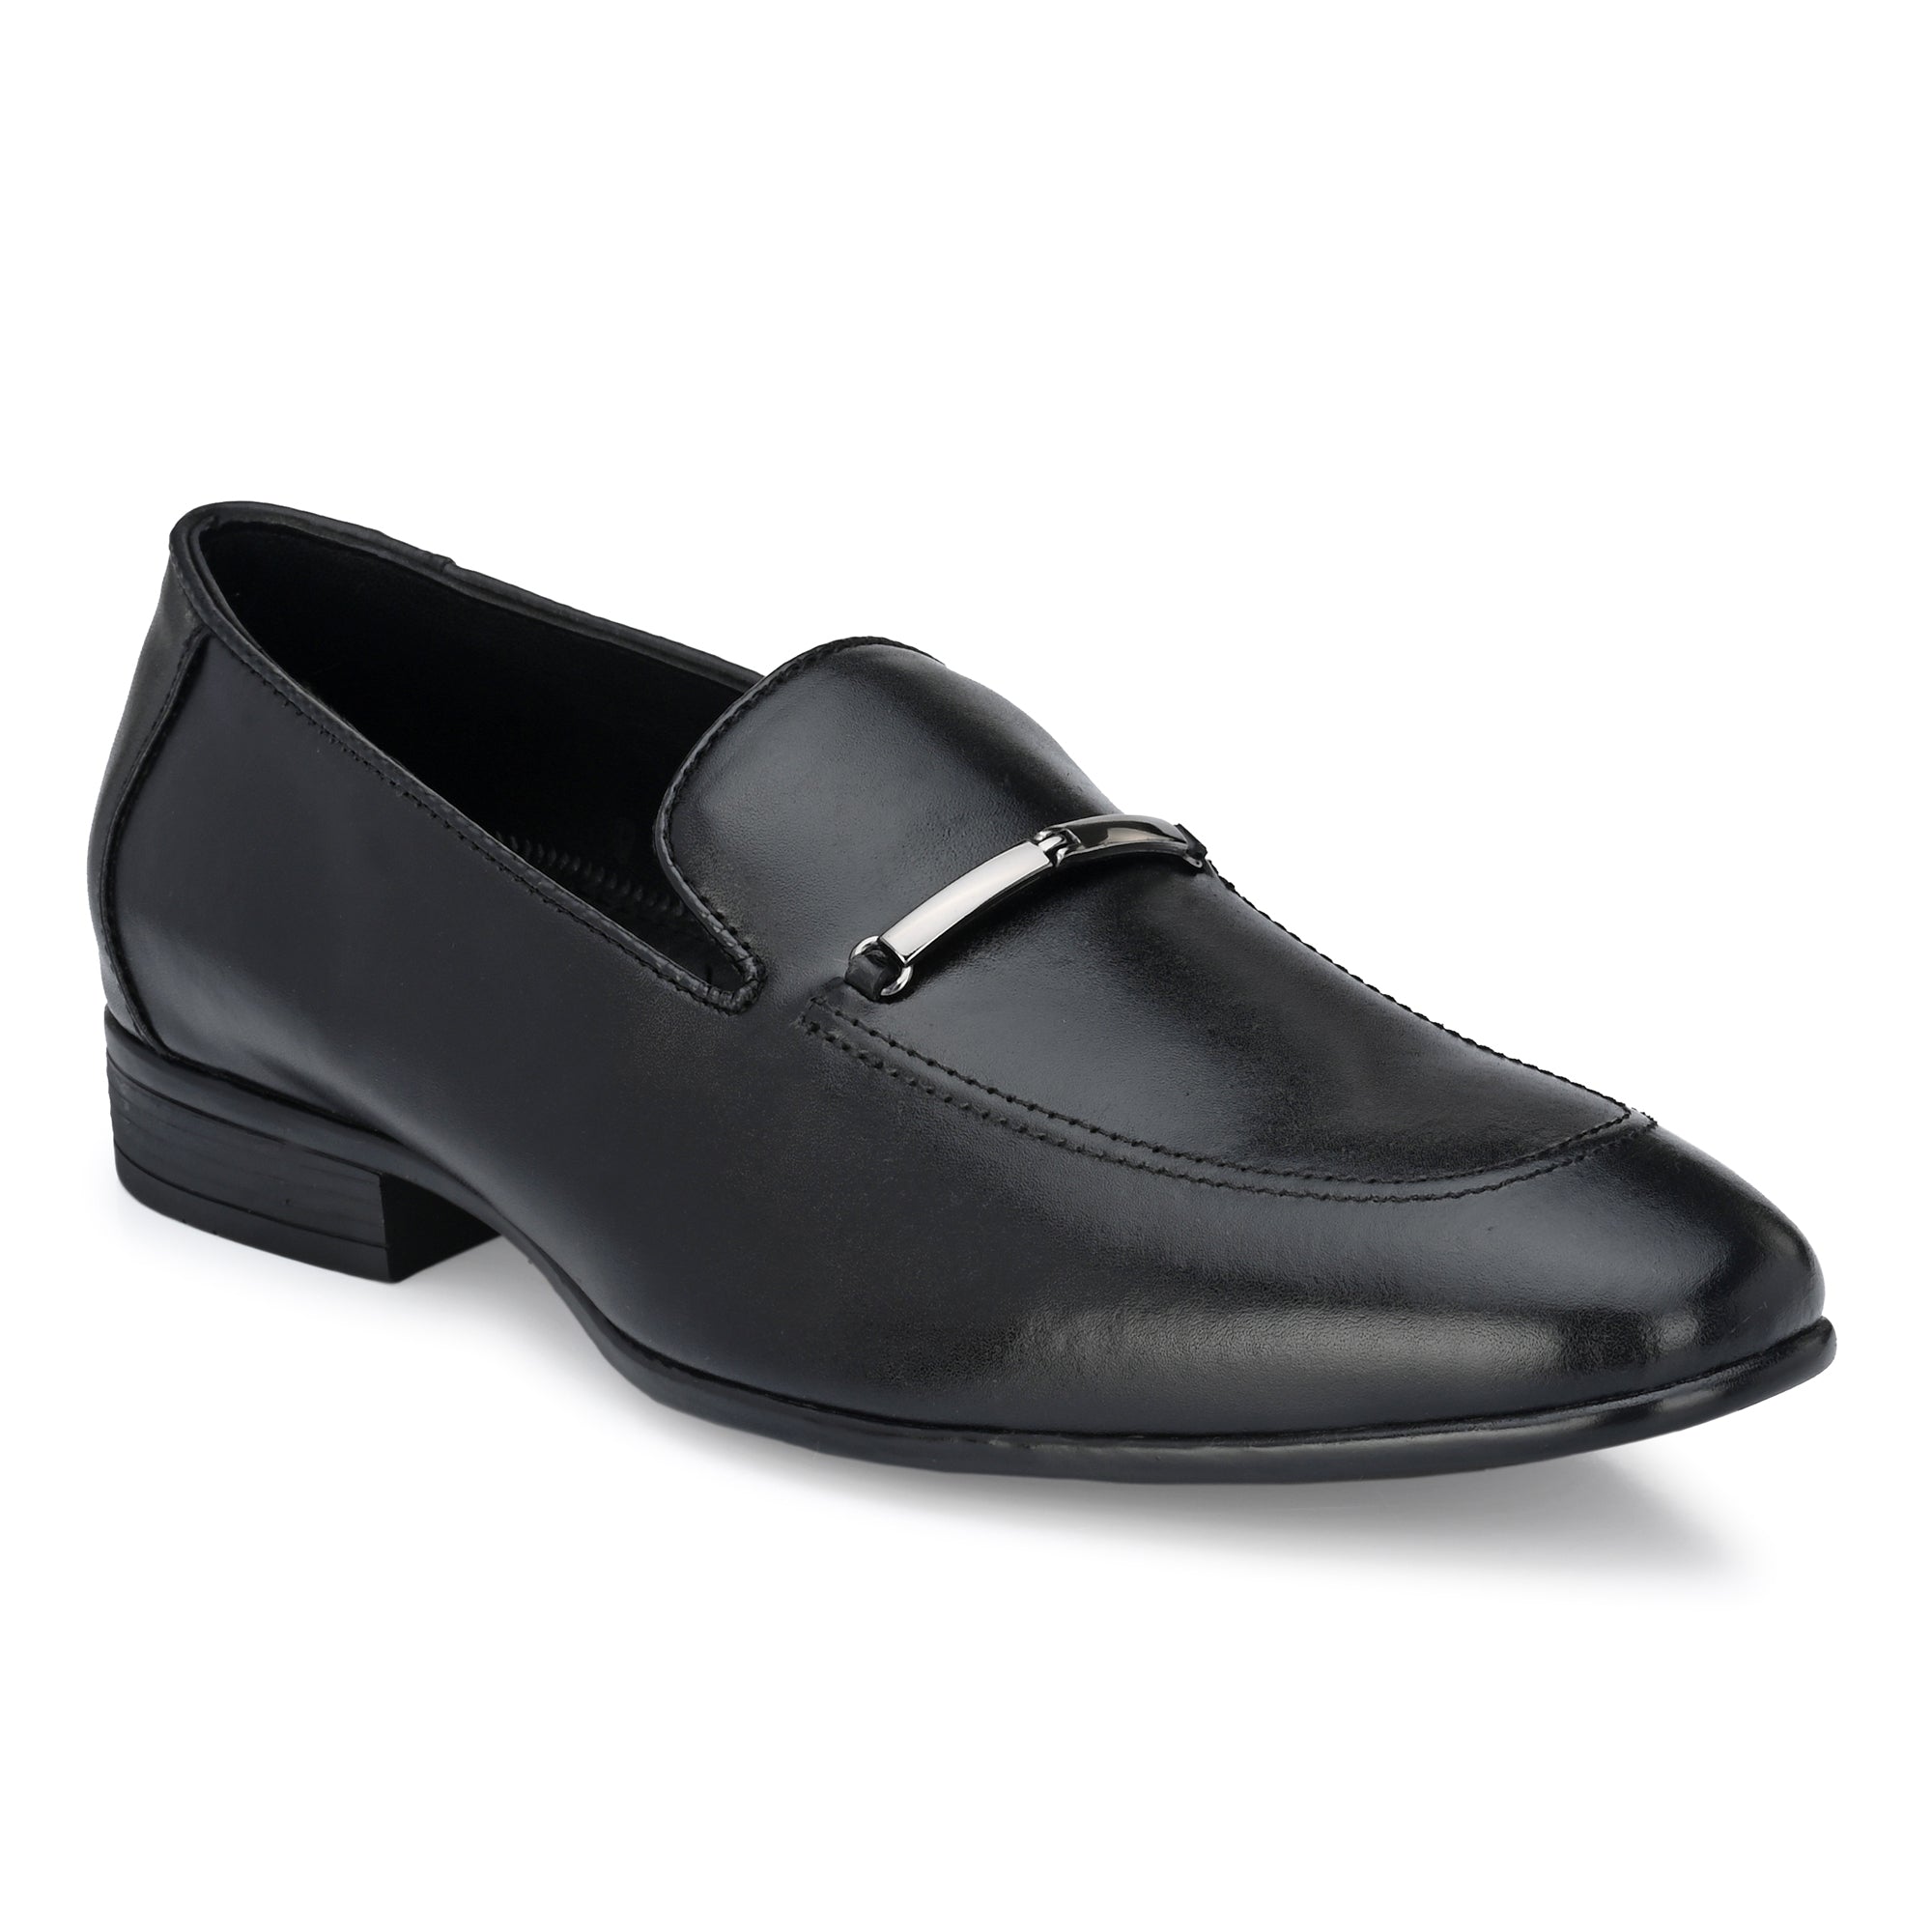 Egoss Mens Buckled Formal Loafers Shoes